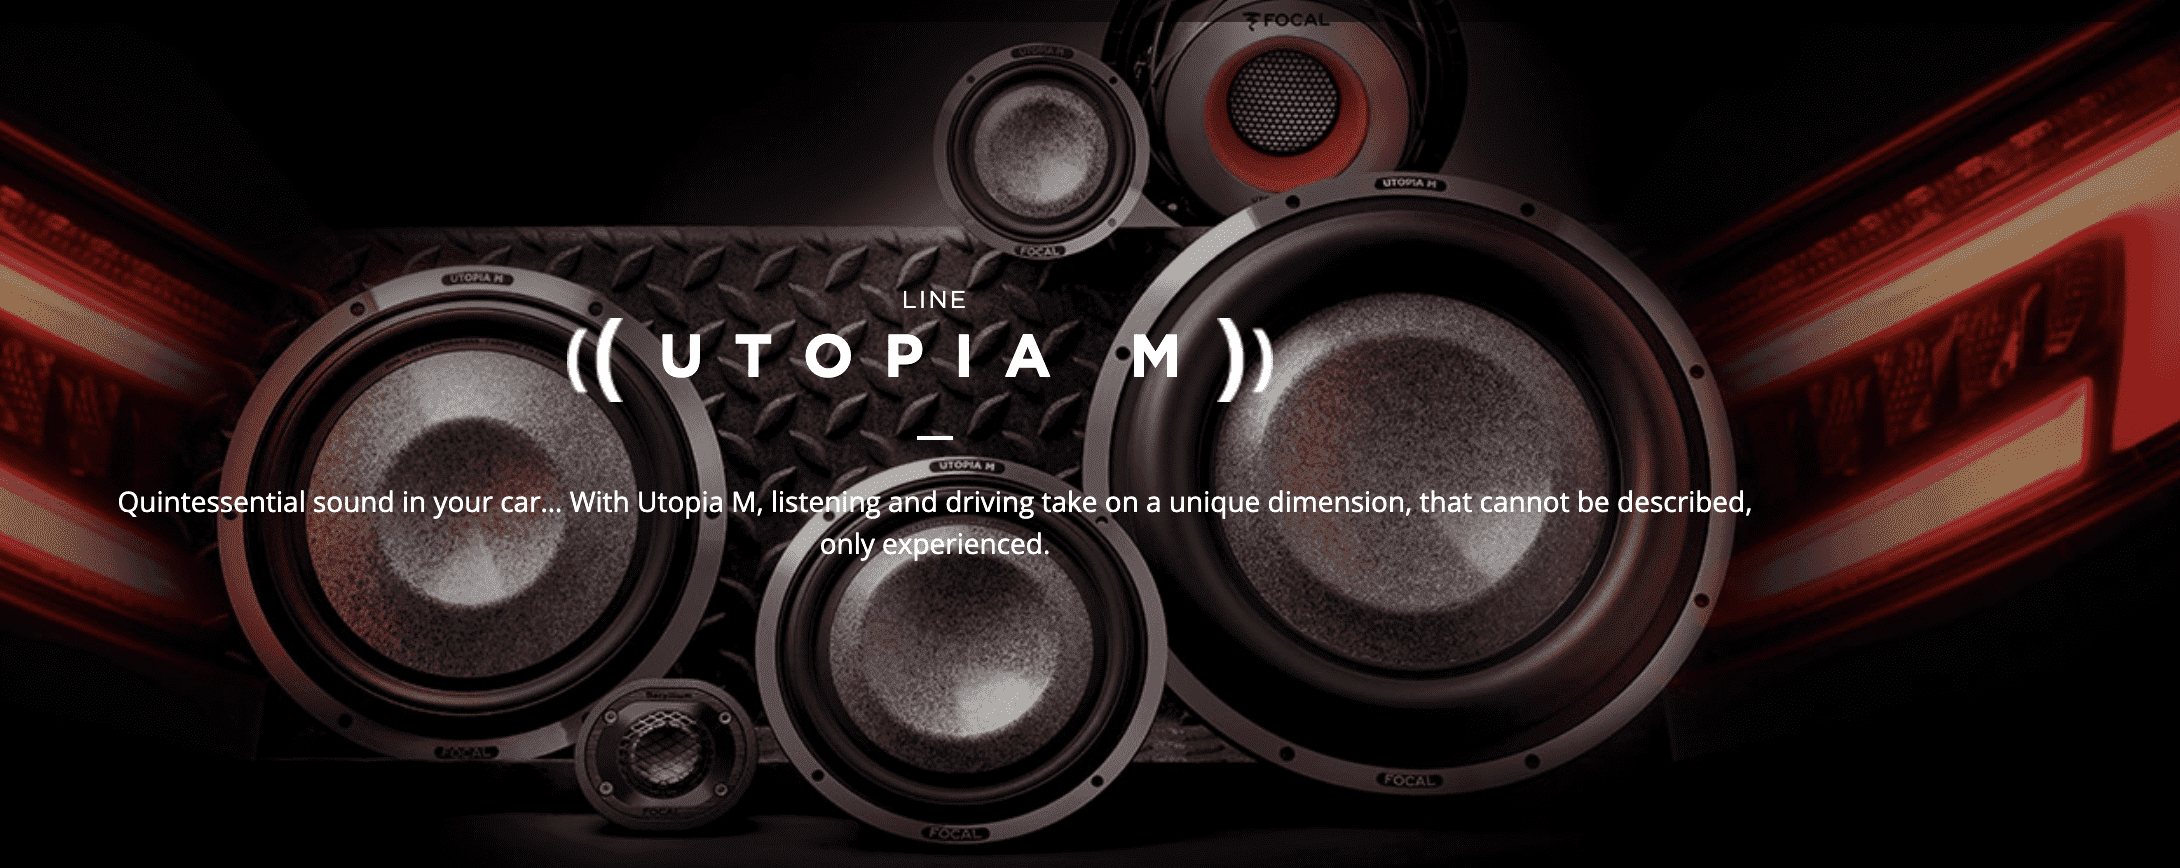 Review-of-the-Focal-Utopia-M-Speakers